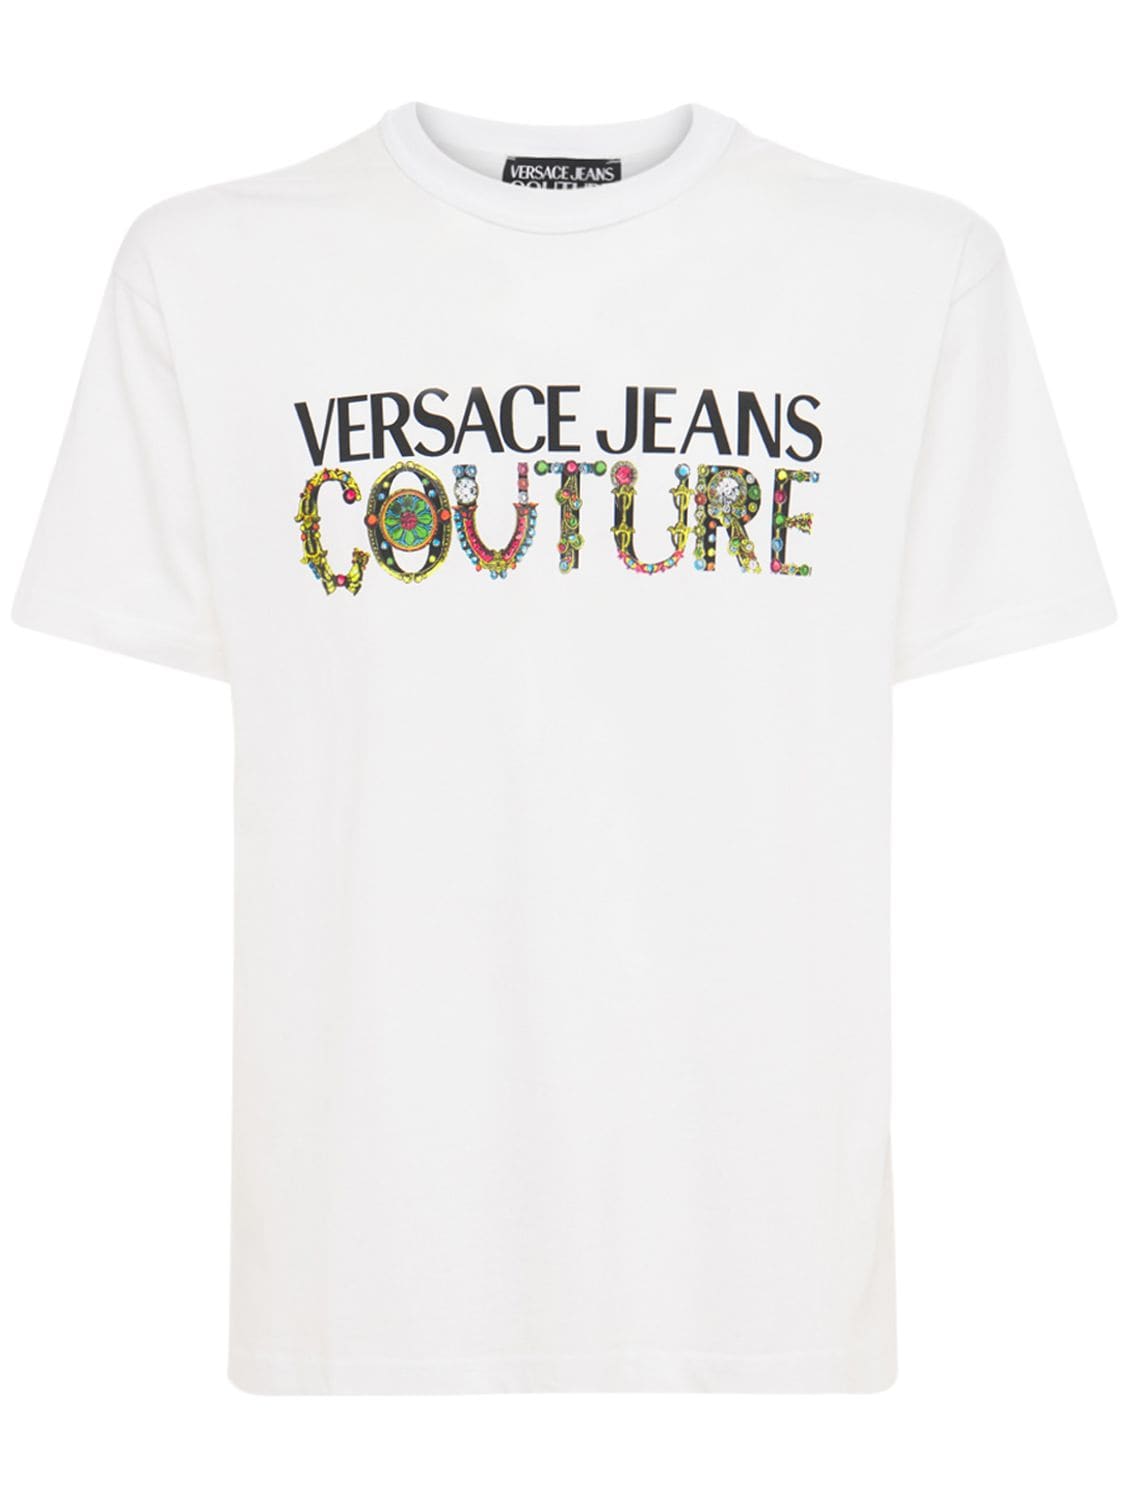 VERSACE JEANS COUTURE LOGO PRINT COTTON JERSEY T-SHIRT,74IBQN026-MDAZ0